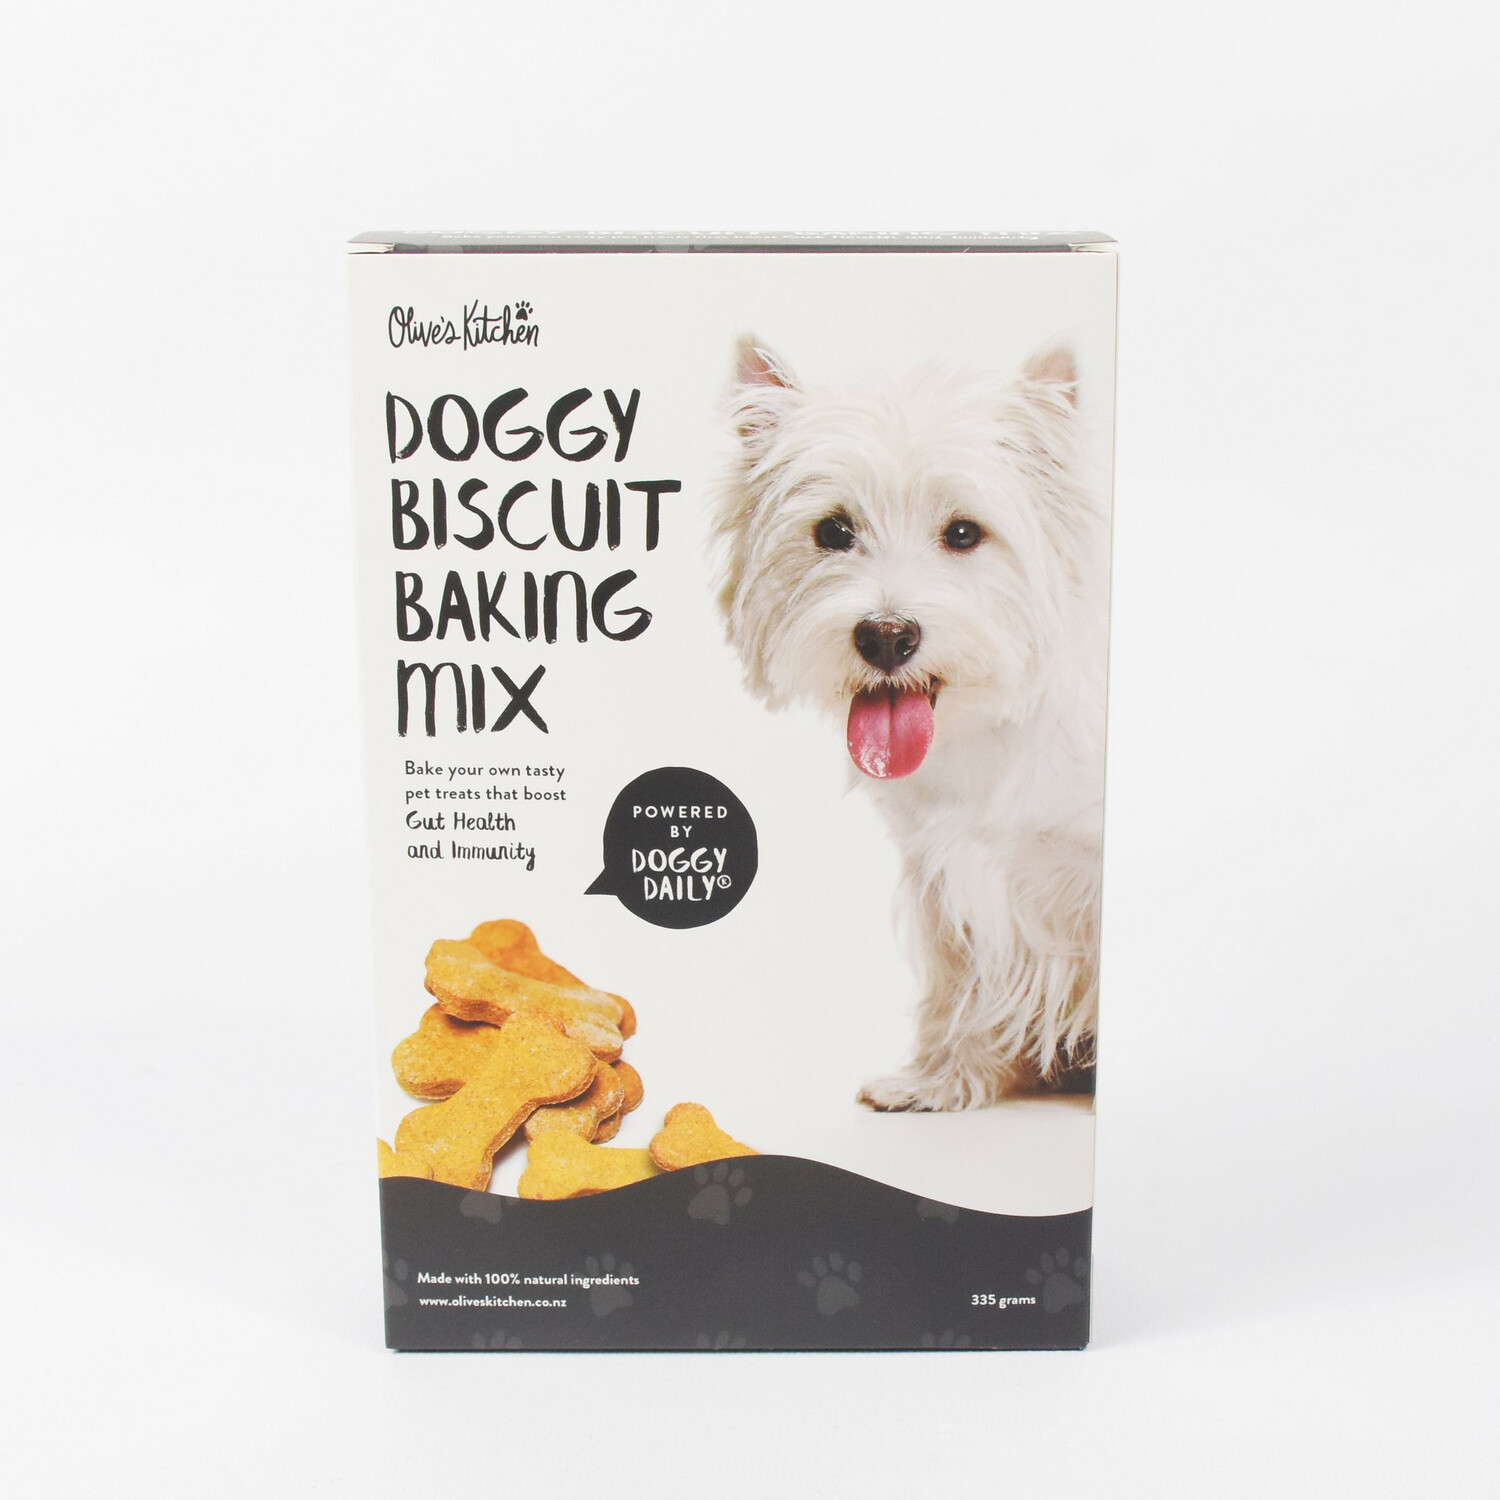 Doggy Biscuit Baking Mix